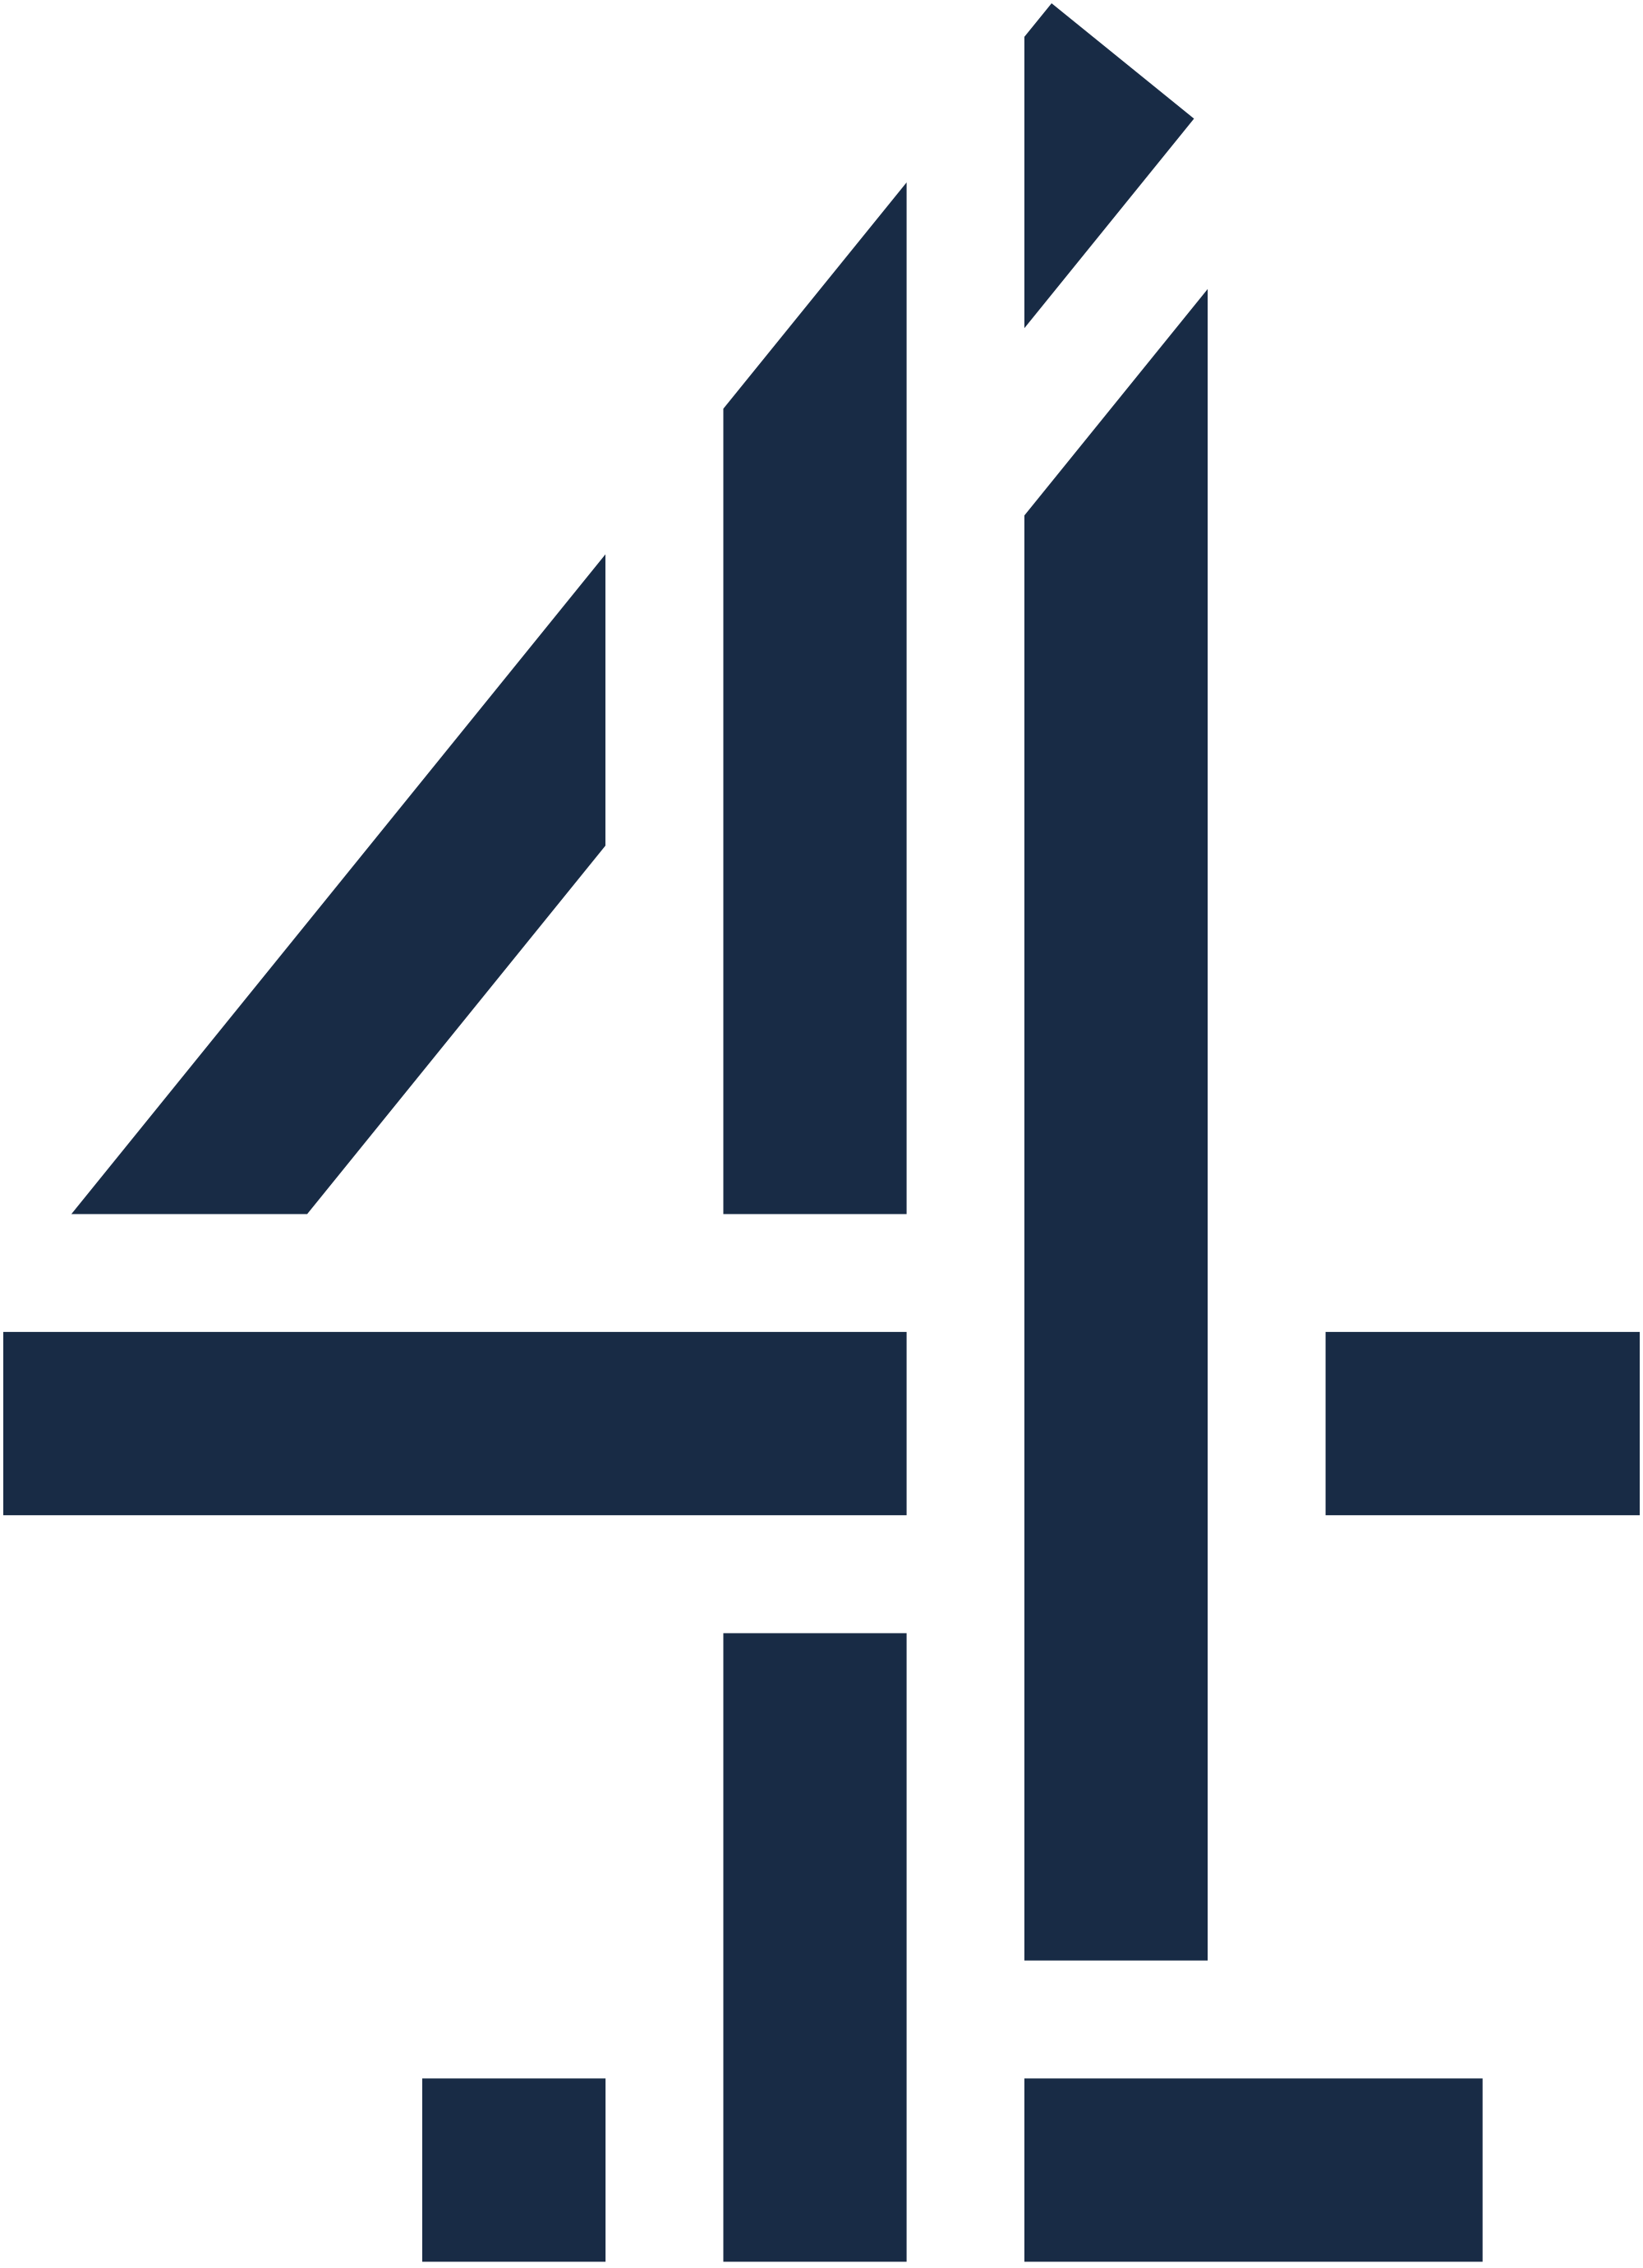 Channel 4 - network